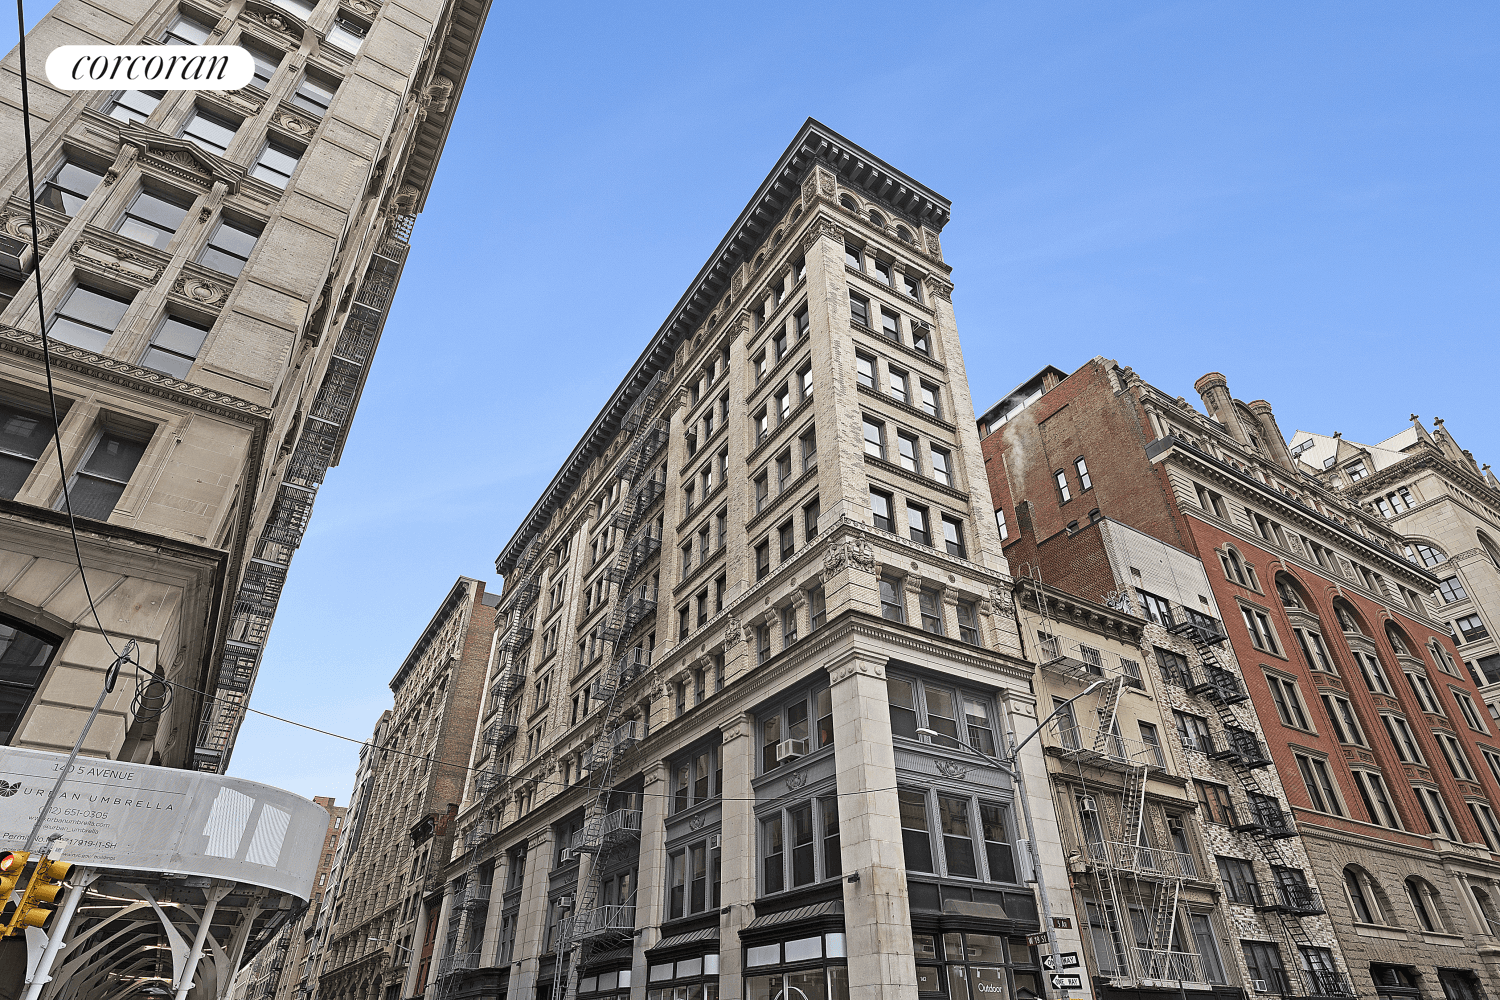 142 Fifth Avenue amp ; 5 West 19th st Entire 9th Floor, two entrances, Residential AND Commercial Listing 8000 SF Live in Residential rent out Commercial INCOME PRODUCING OPPORTUNITY or ...